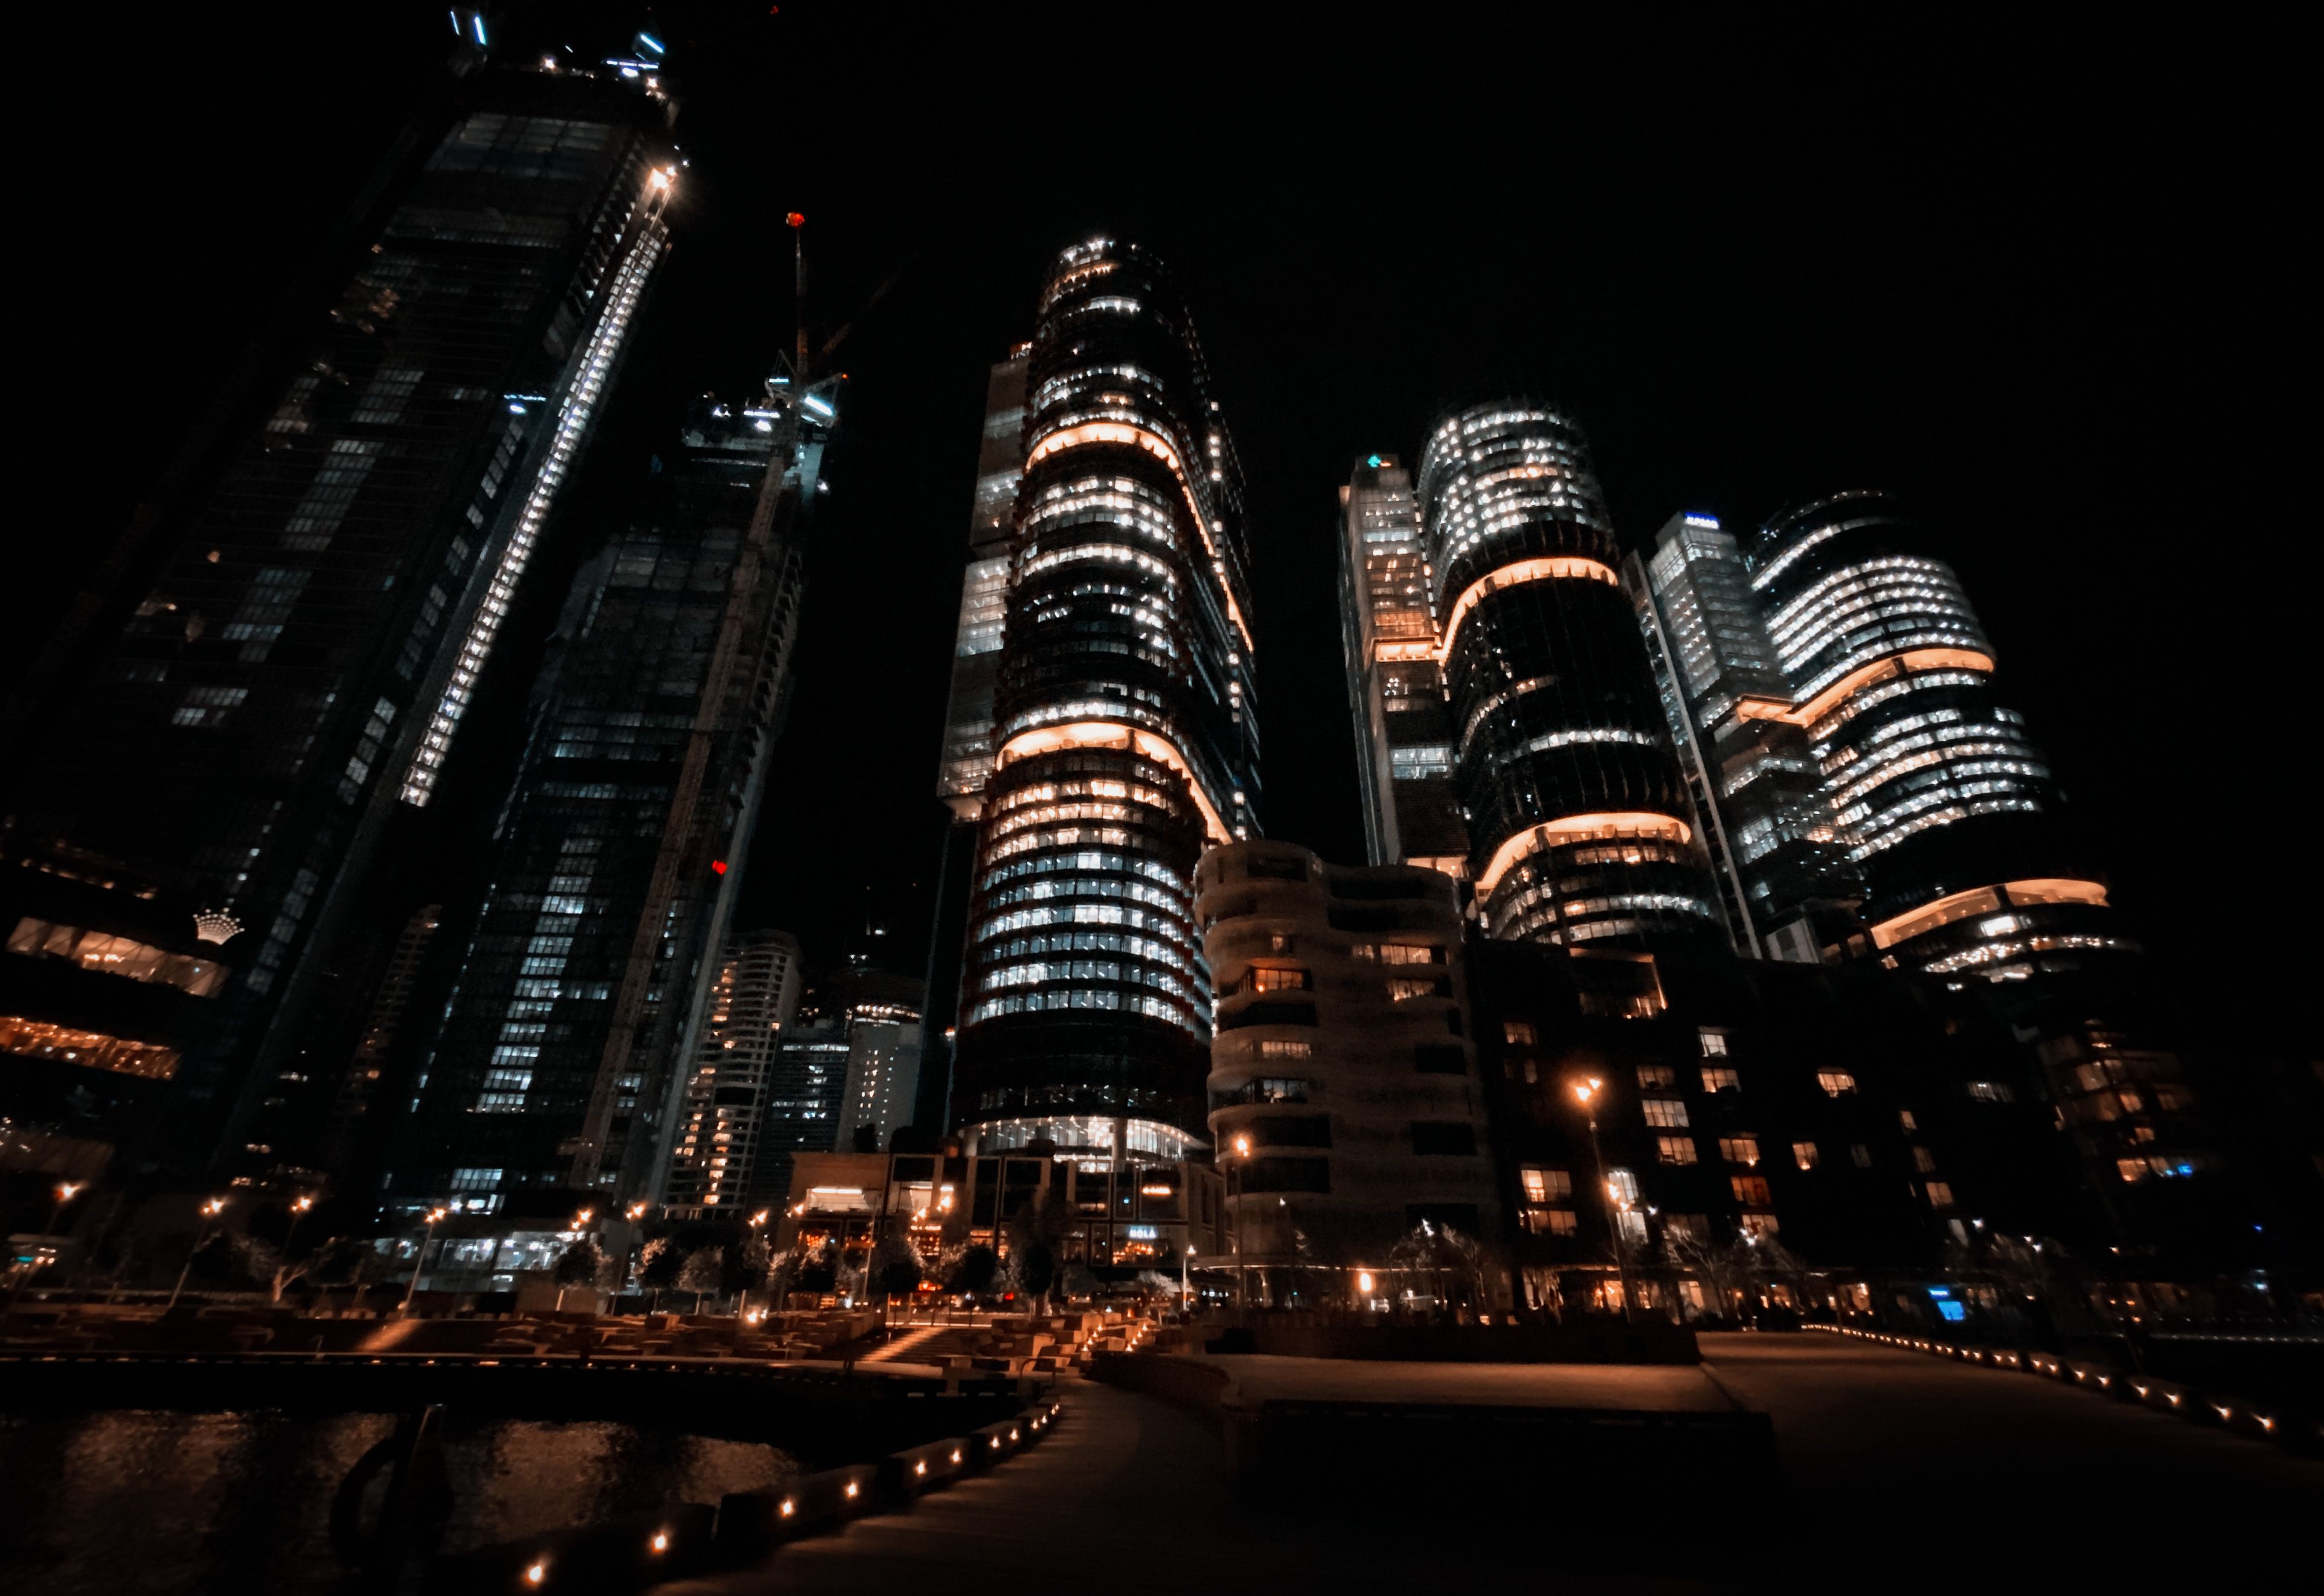 A photo taken at night looking up at three huge tower buildings. The front of them are curved and the lights are mostly blue but with a couple of sections where it's a much warmer, yellow colour. The photo itself is slightly blurry which makes it almost look like it's looking up into clouds which makes the buildings seem even taller.